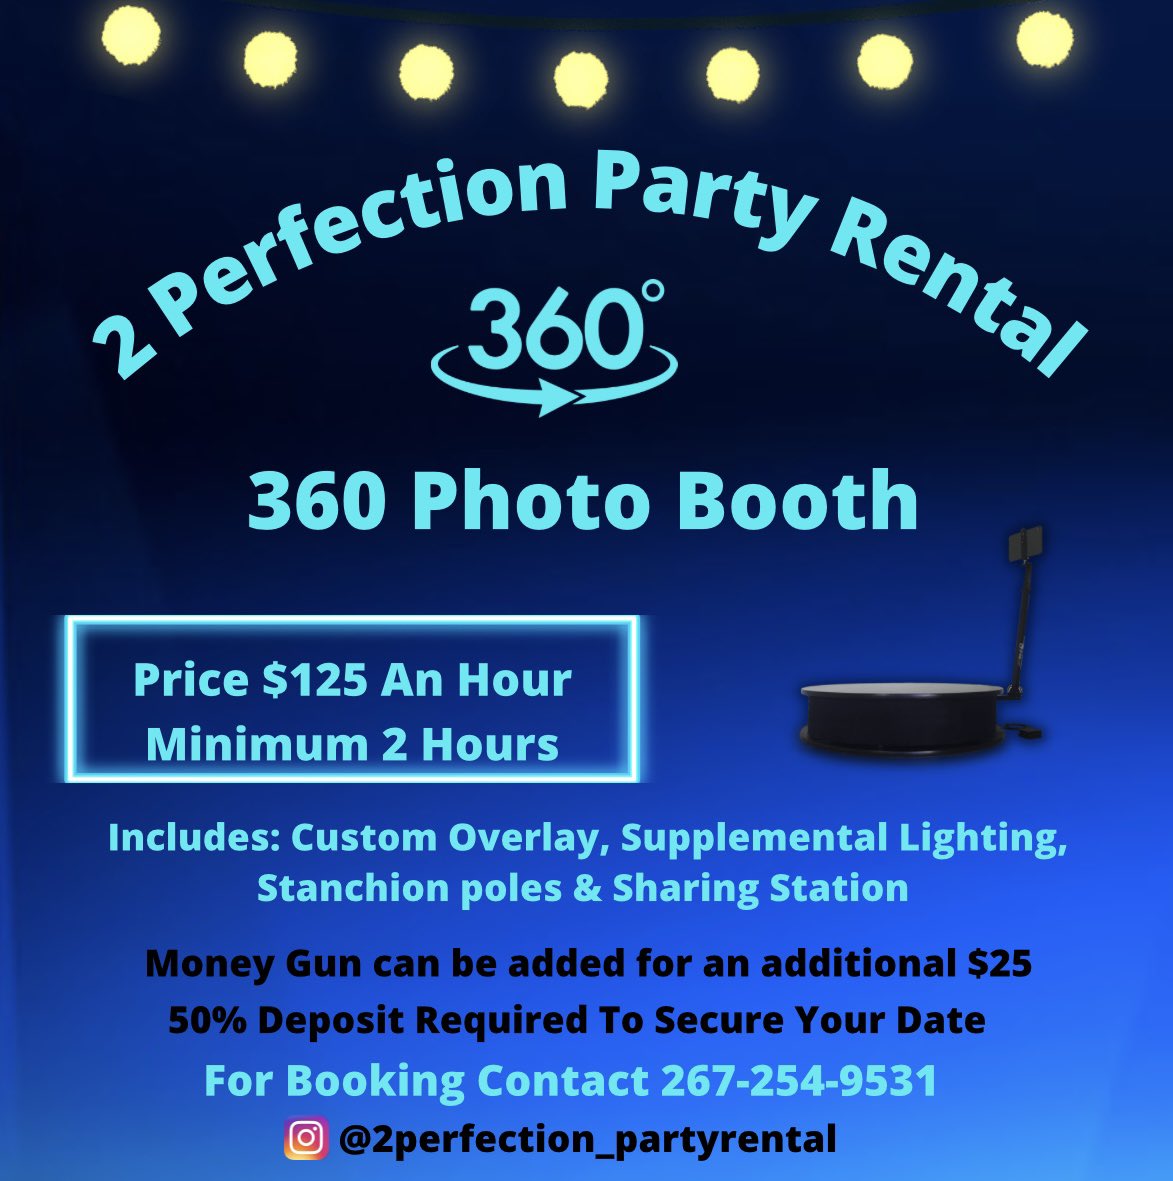 Book our 360 Photo booth for your next event #360 #photobooth #360machine #360photobooth #360spinner #360video #partyrental #events #prom  #promsendoff #graduation #graduationparty #birthdayparty #wedding #babyshowers #foreveryoccasion #genderreveal #bookwithme #philly #nj #de